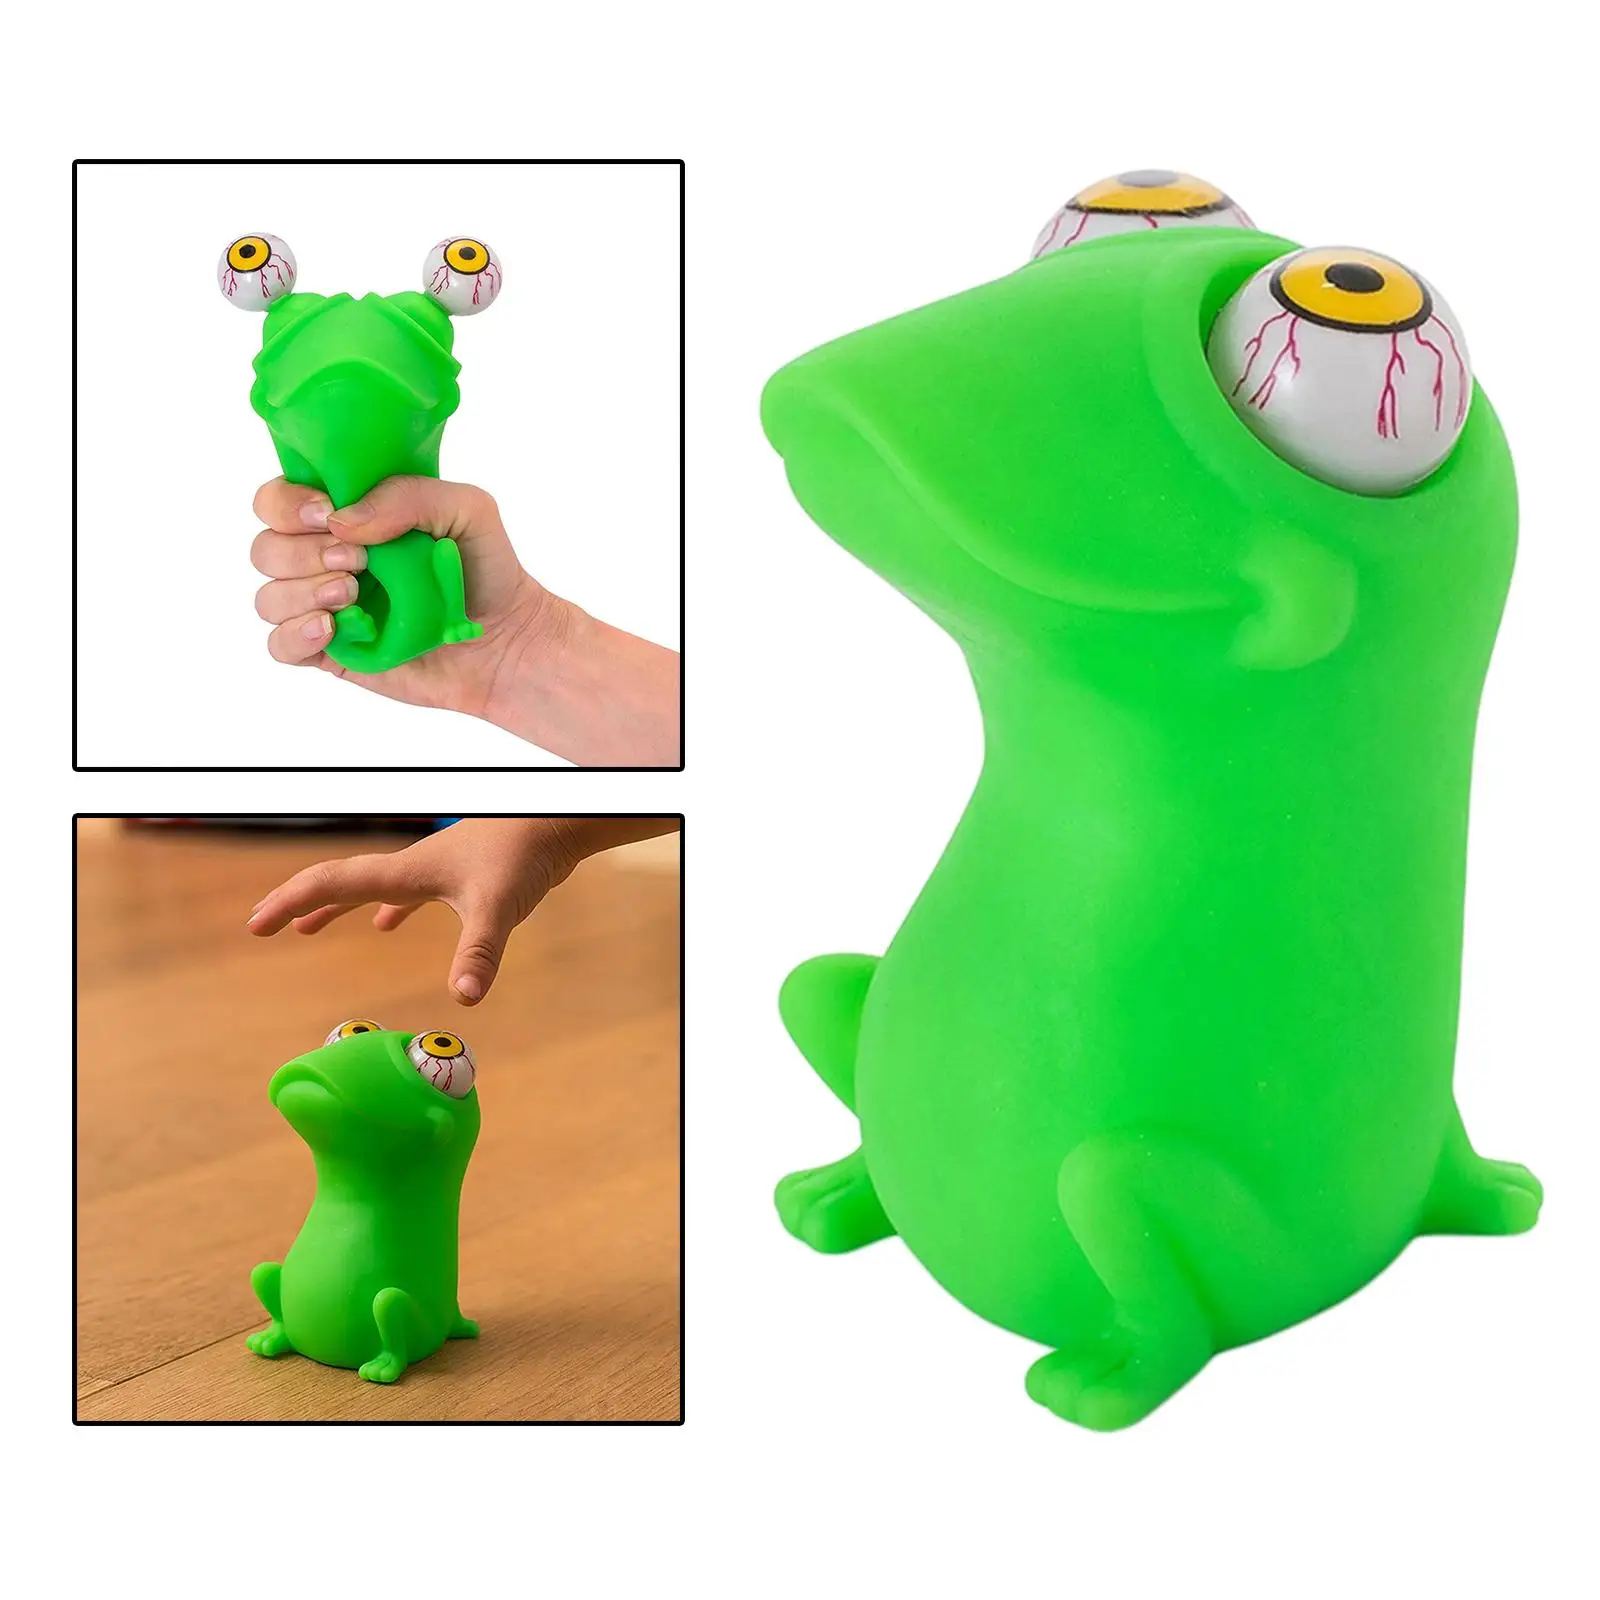 Squeeze Antistress Toy Eye Popping Latex Free Anti-Anxiety Large Squeeze Animal Fidget Sensory Toys Toy Figure for Kids